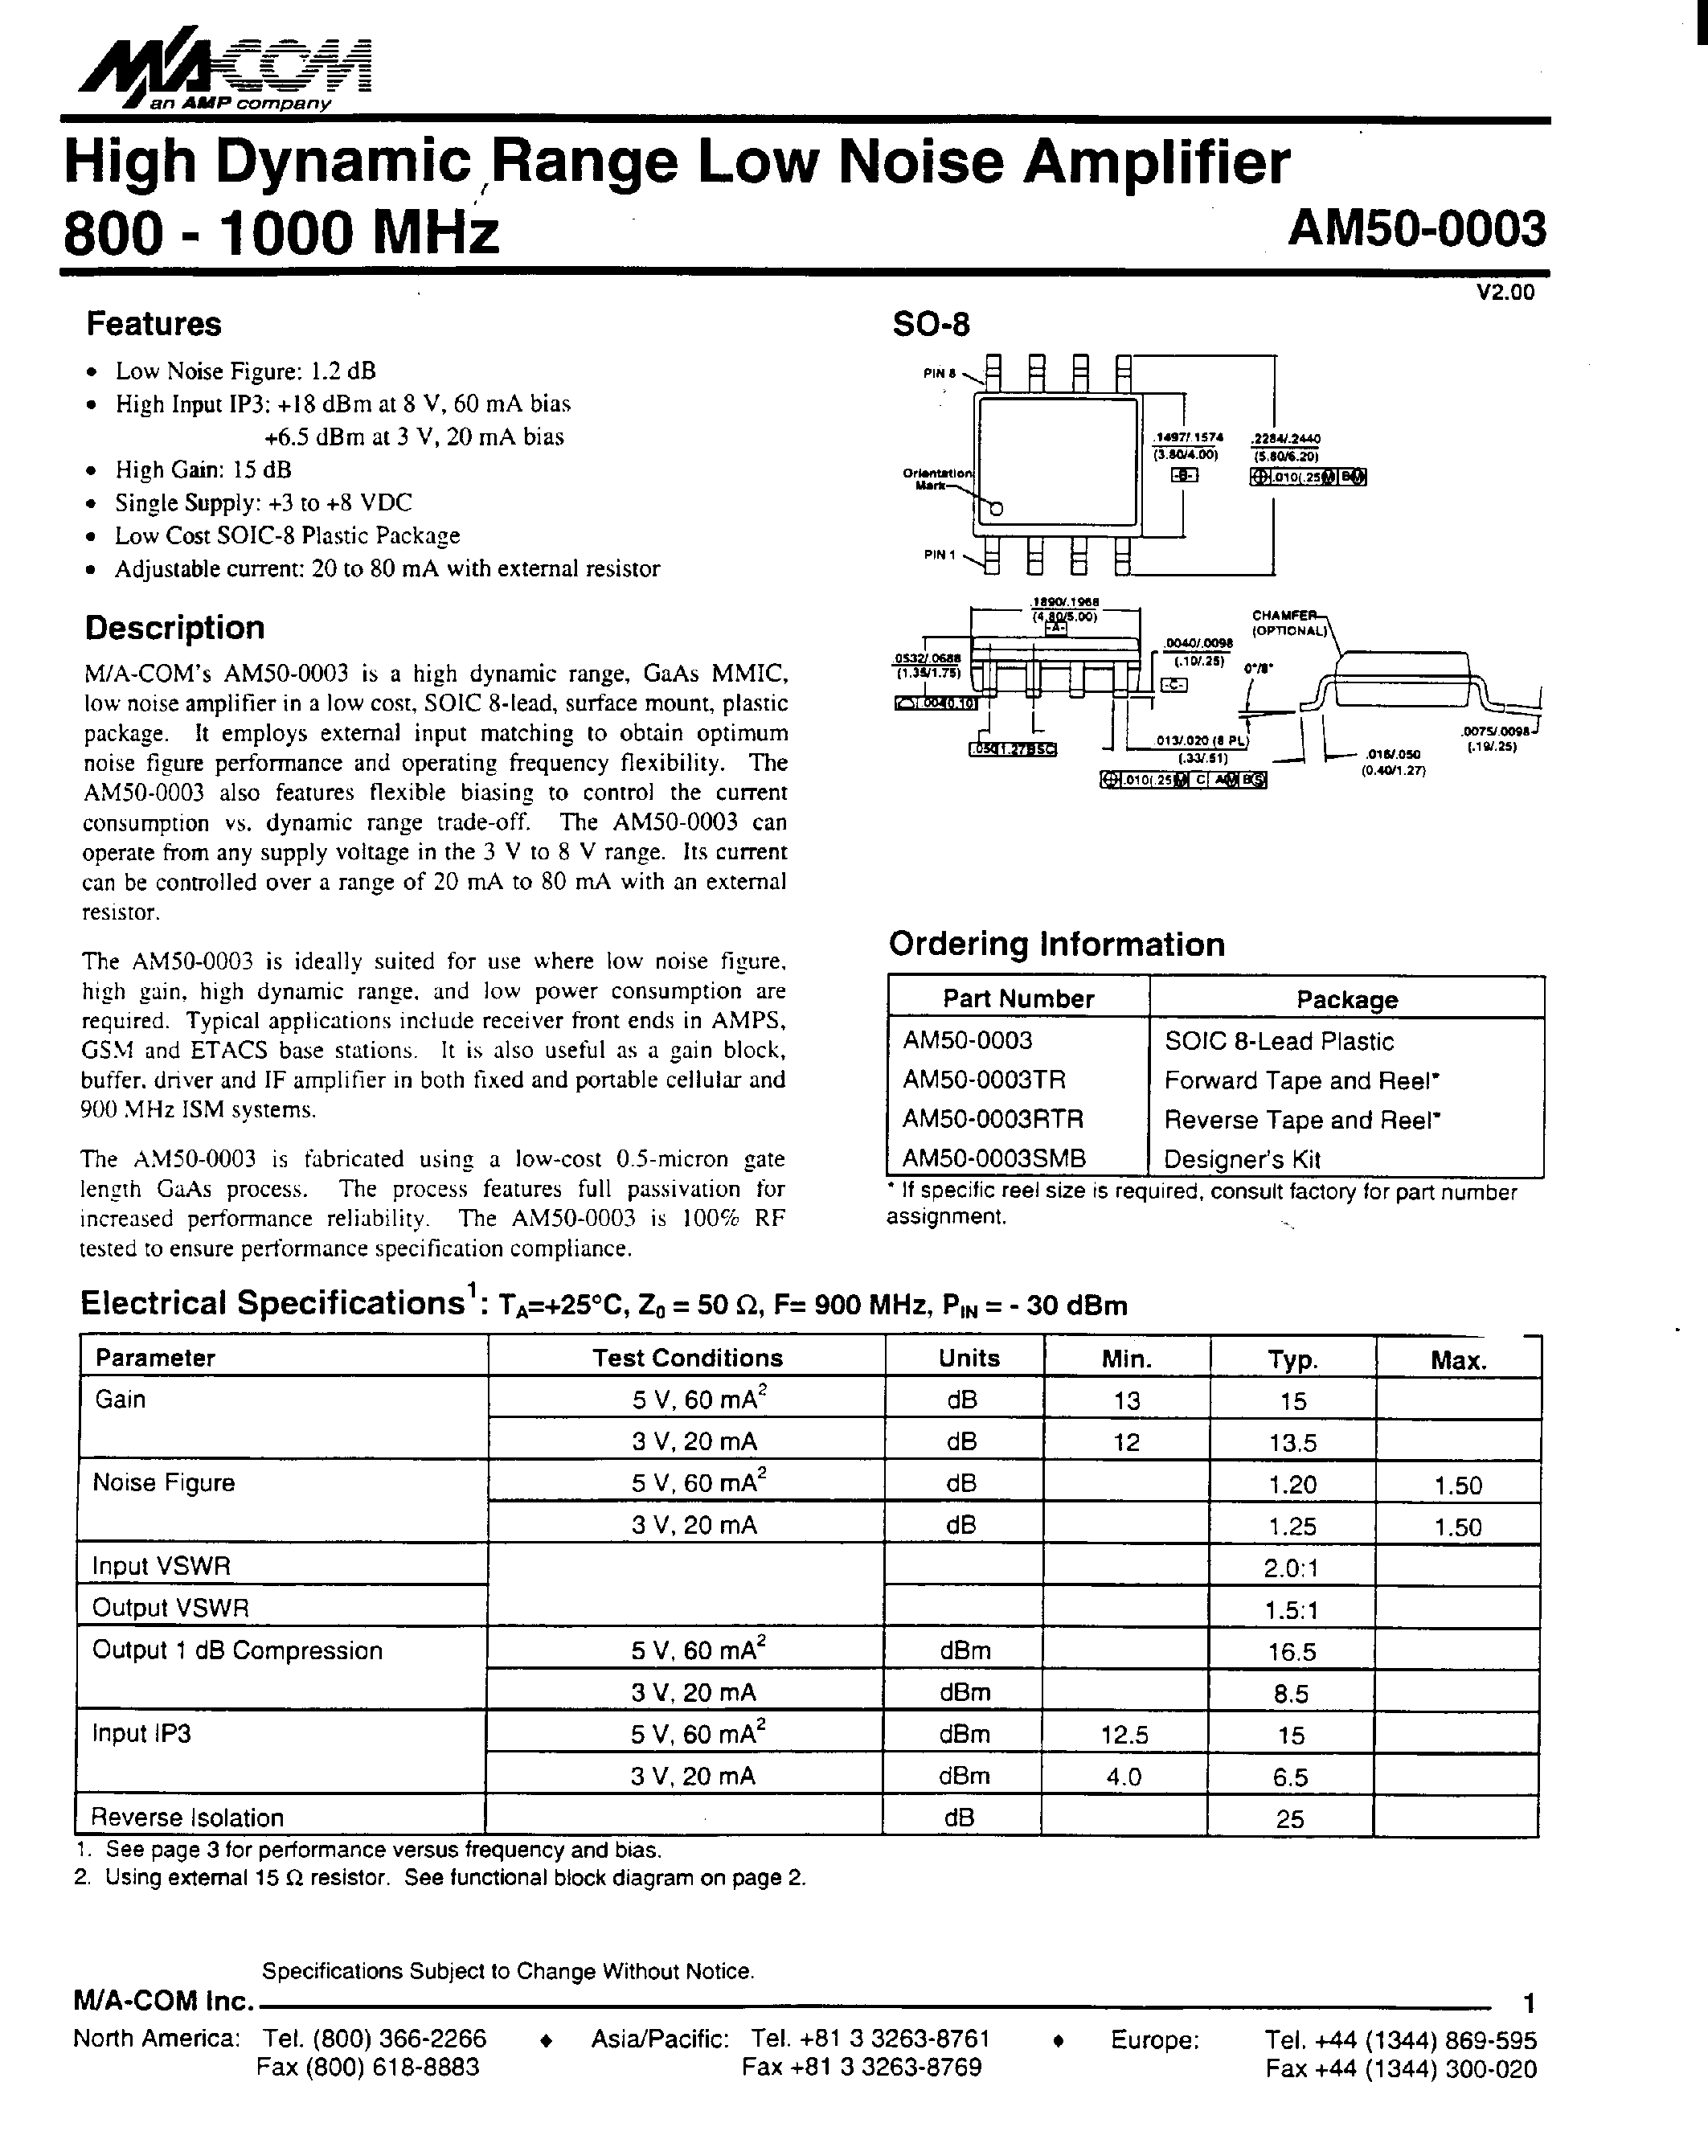 Datasheet AM50-0003RTR - High Dynamic Range Low Noise Amplifier 800-1000 MHz page 1